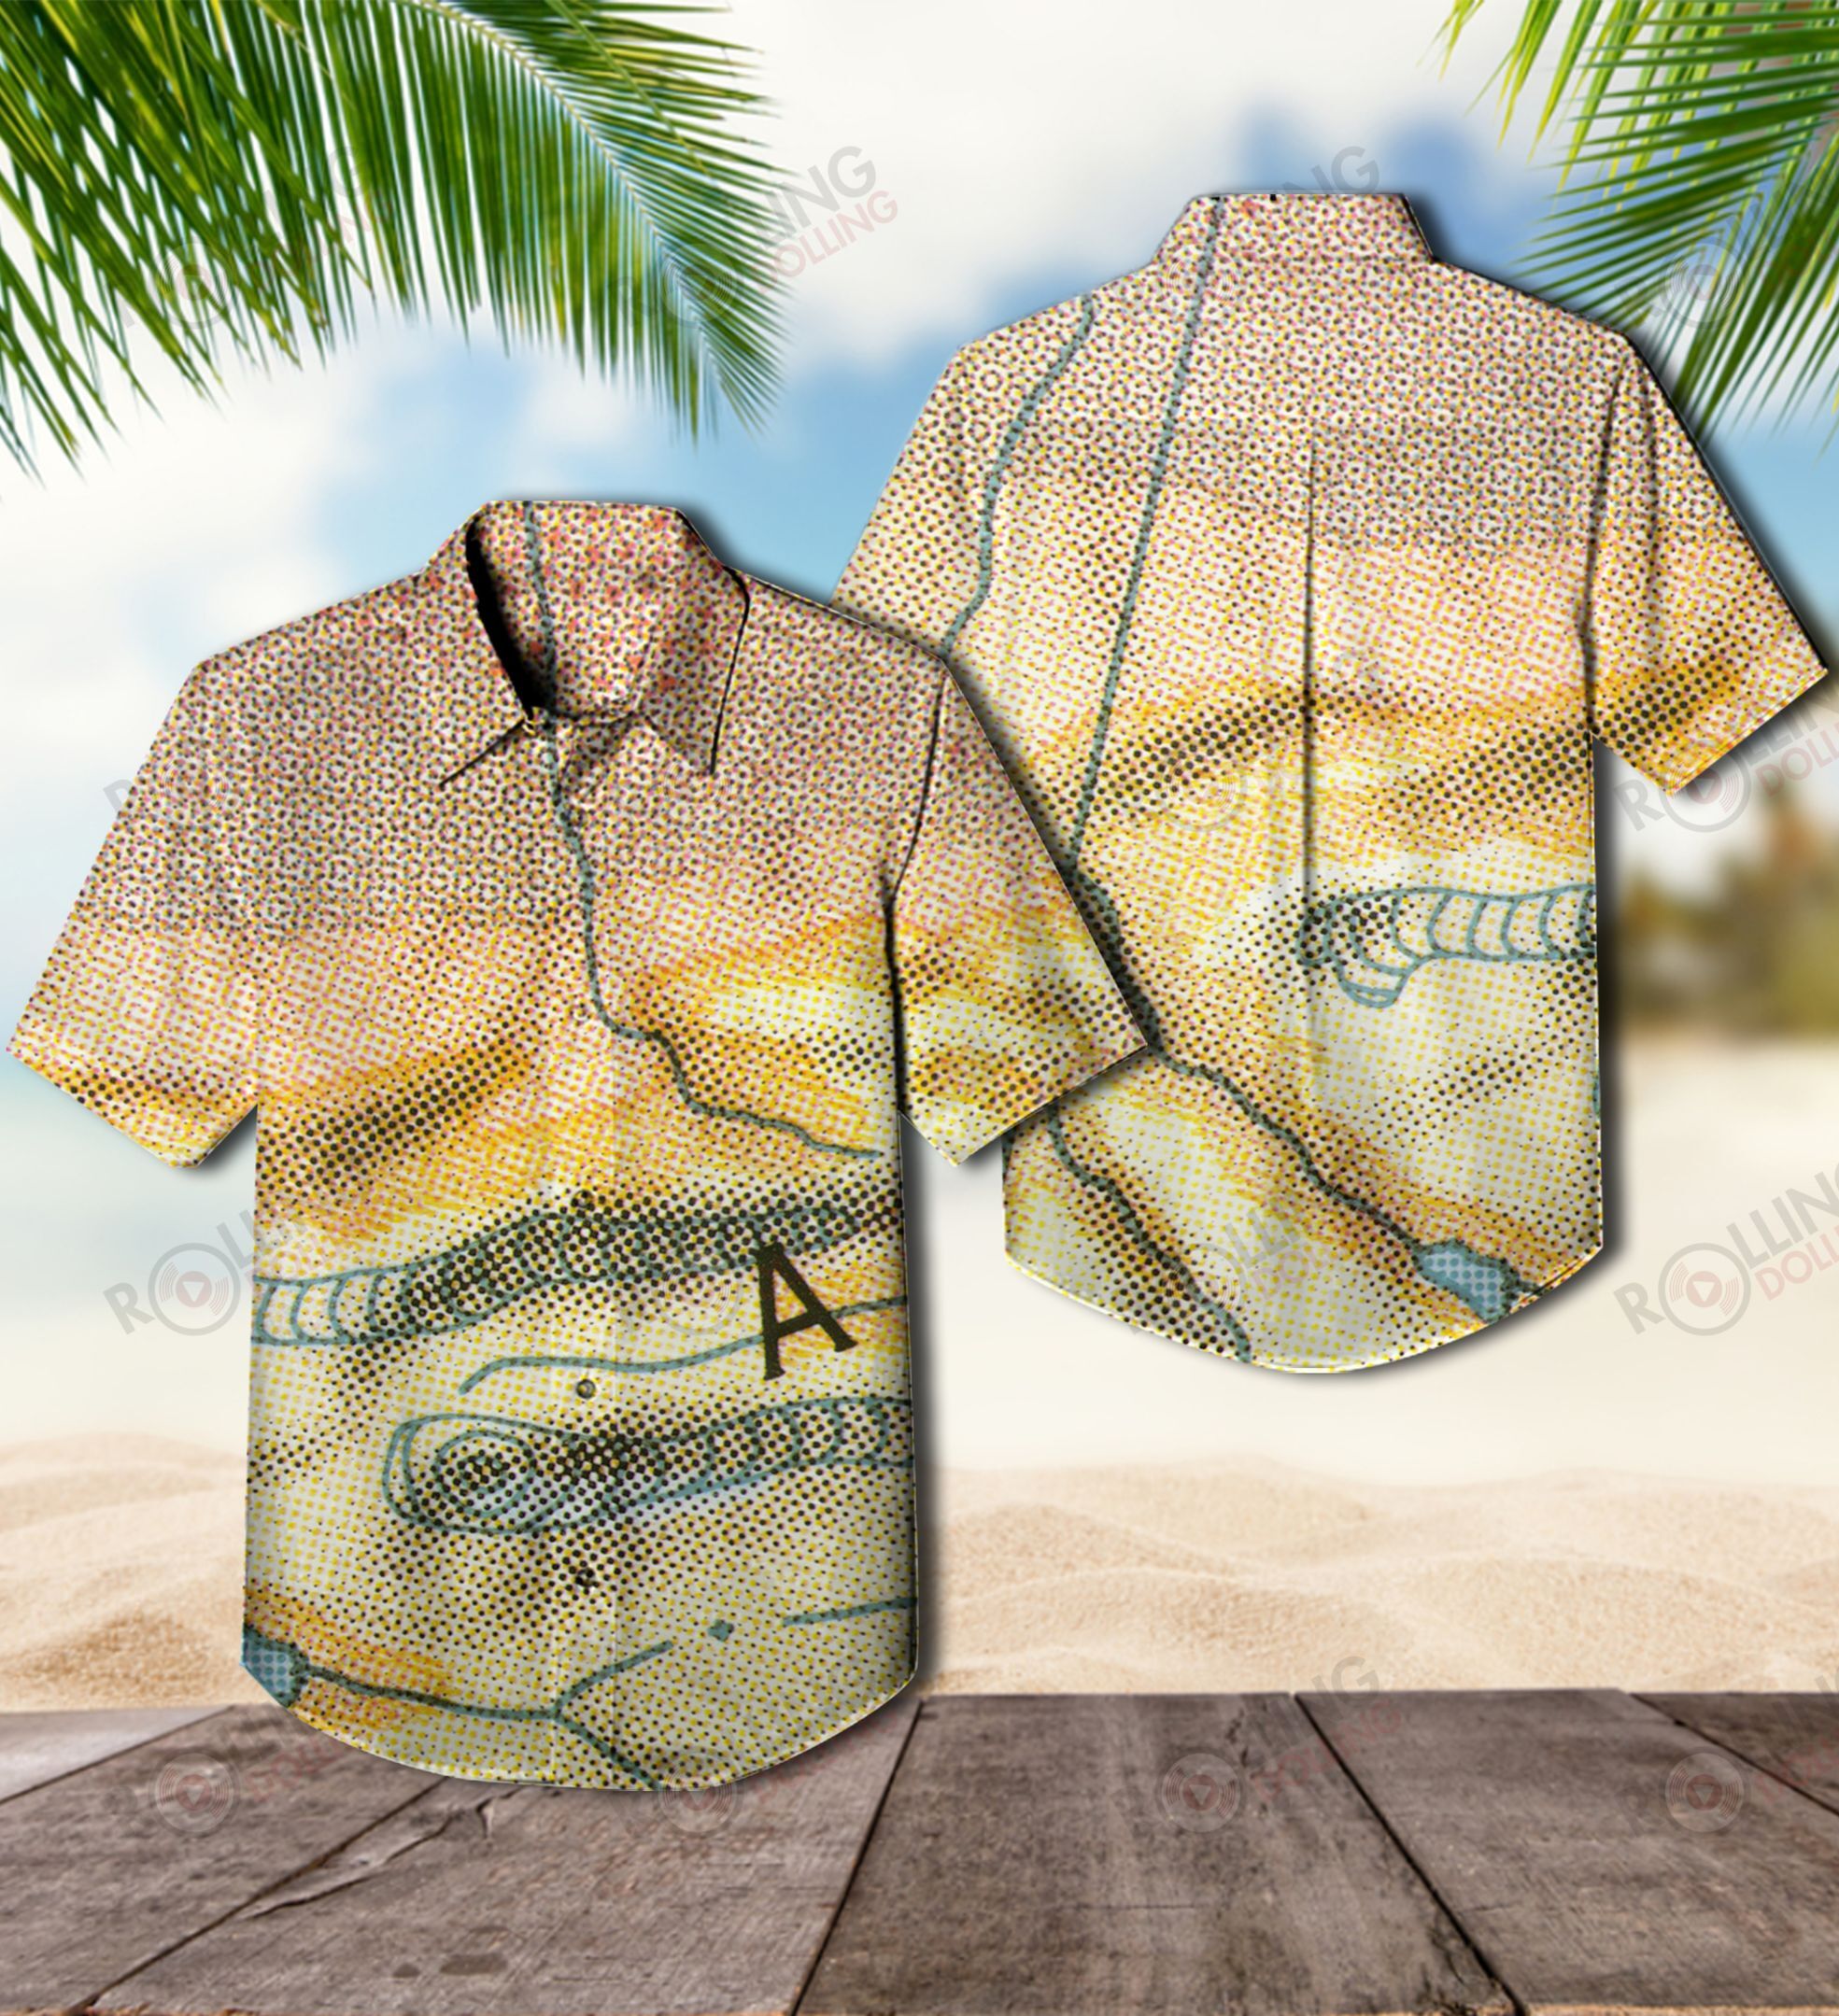 We have compiled a list of some of the best Hawaiian shirt that are available 53